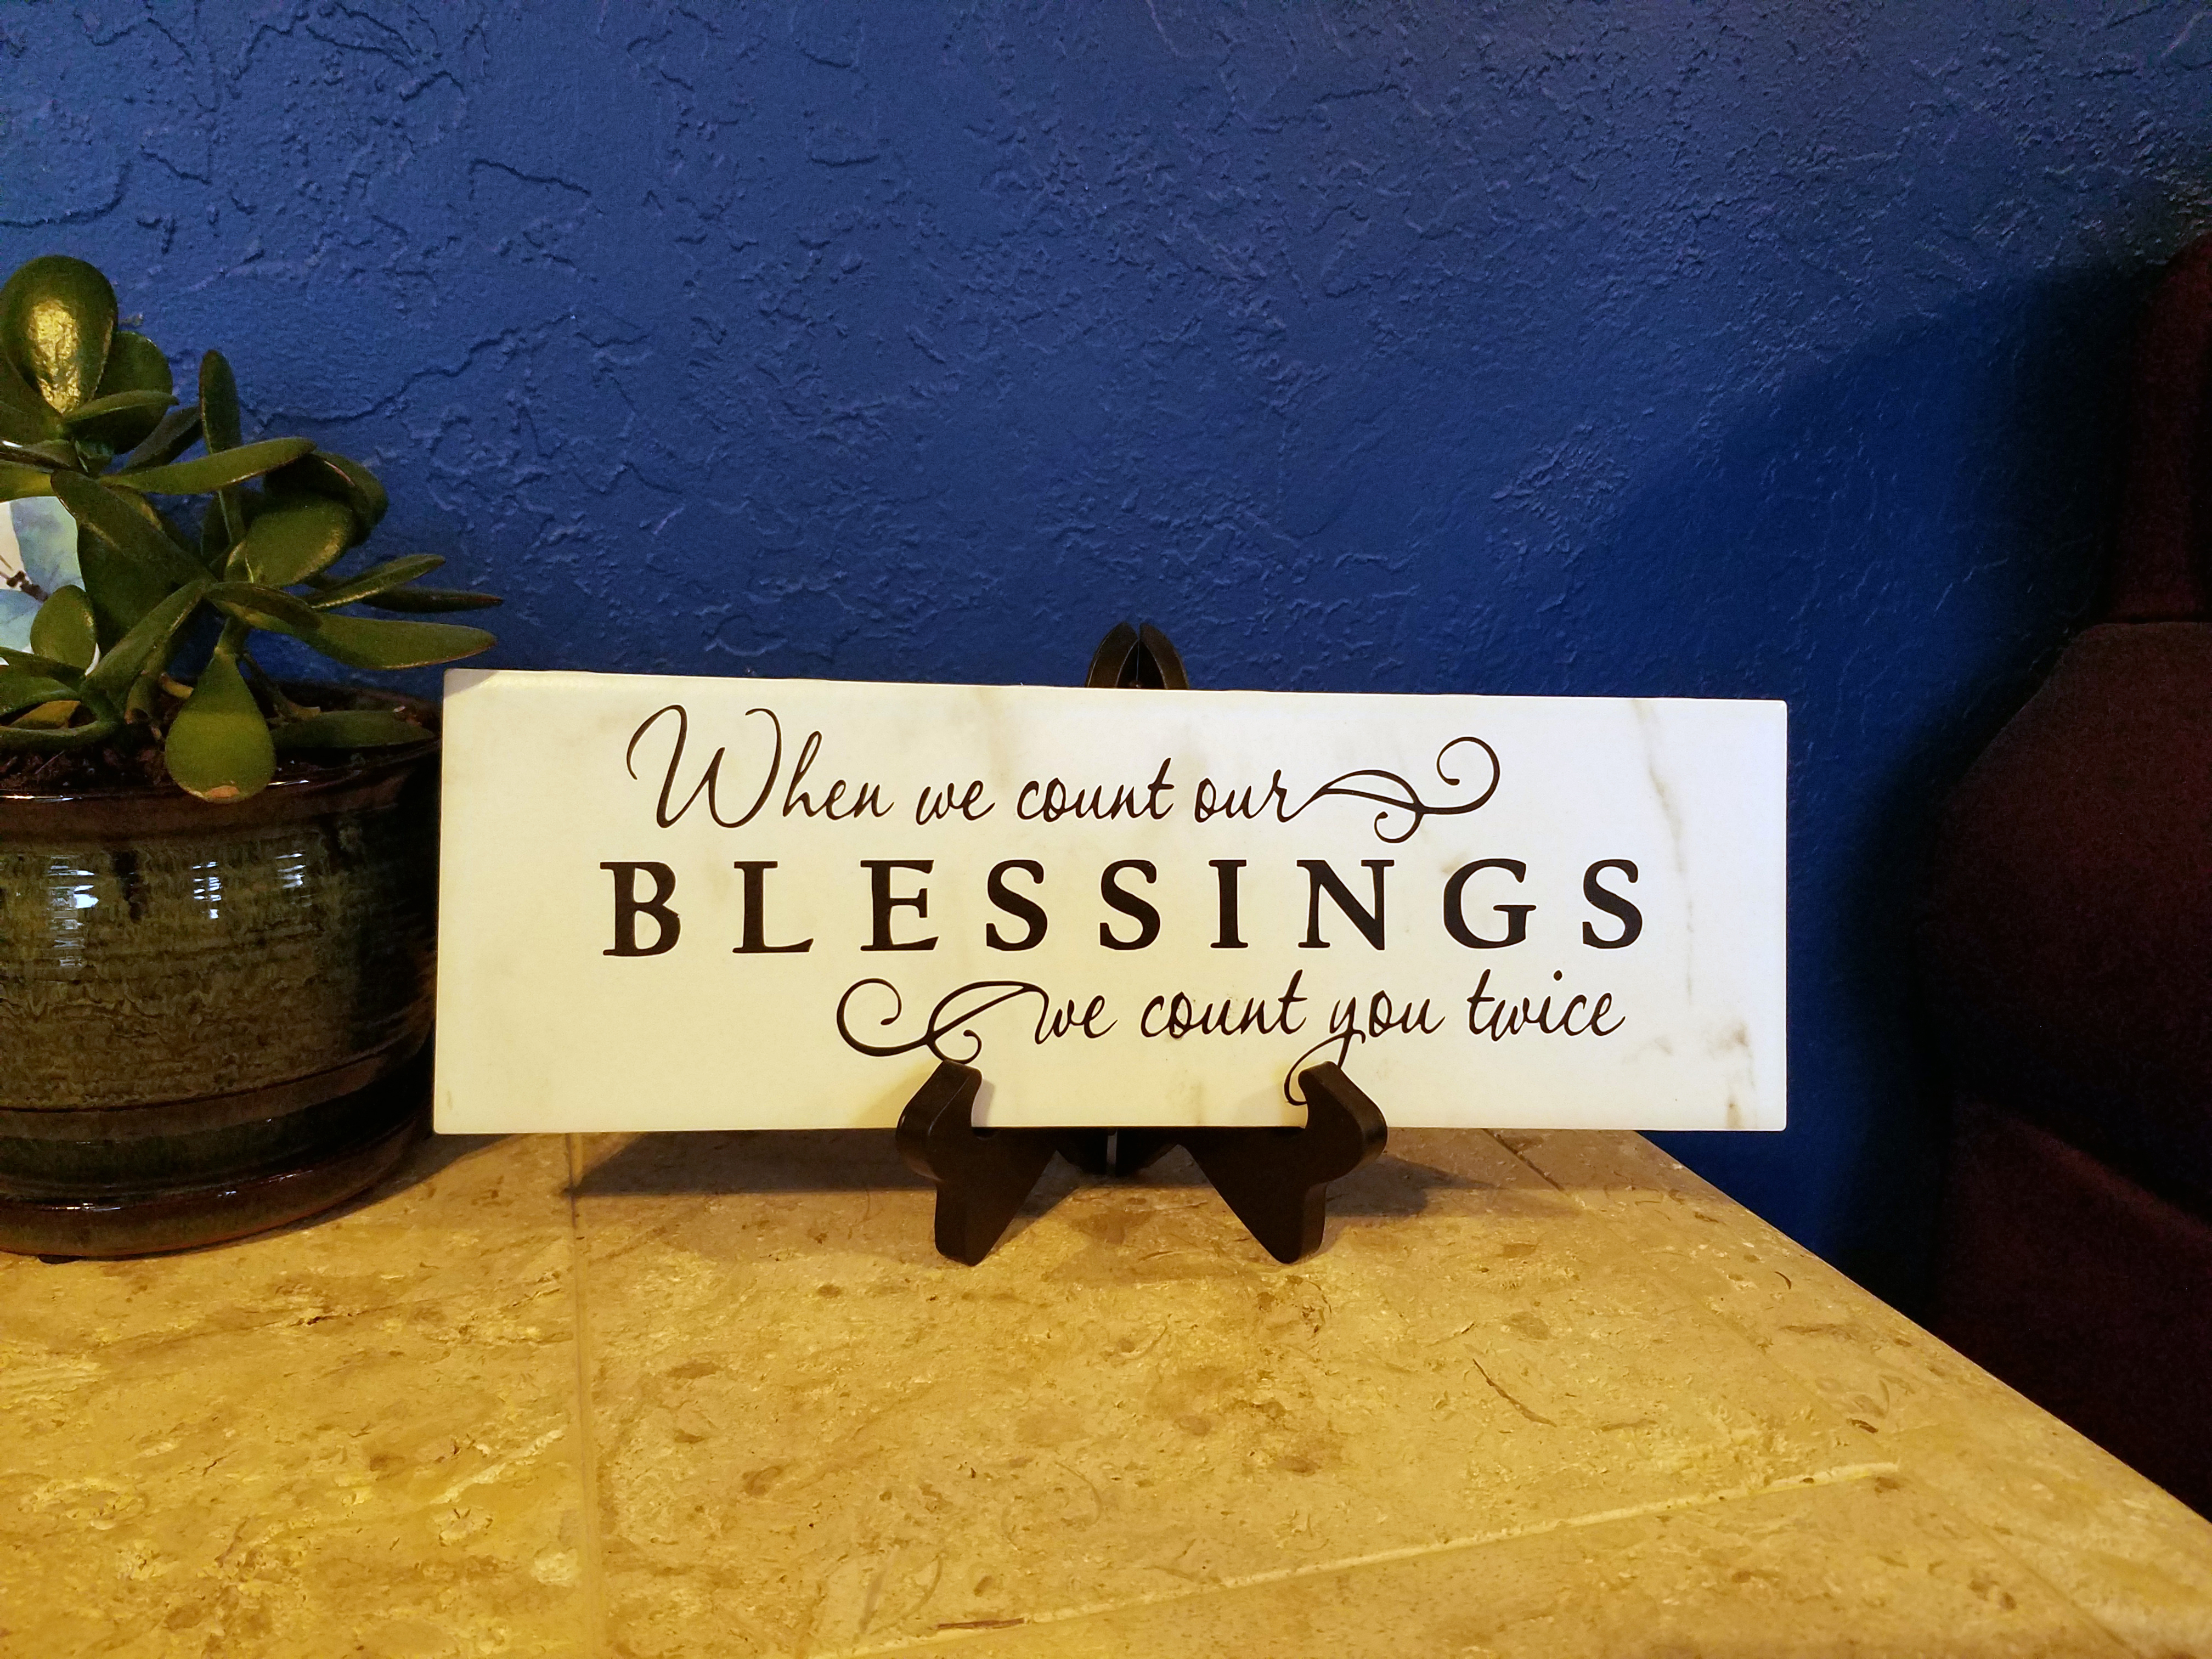 Custom Design By Custom Laser Art Designs.  It is a vinyl-cut quote placed on a decorative tile.  The saying is:  When We Count Our Blessings, We Count You Twice